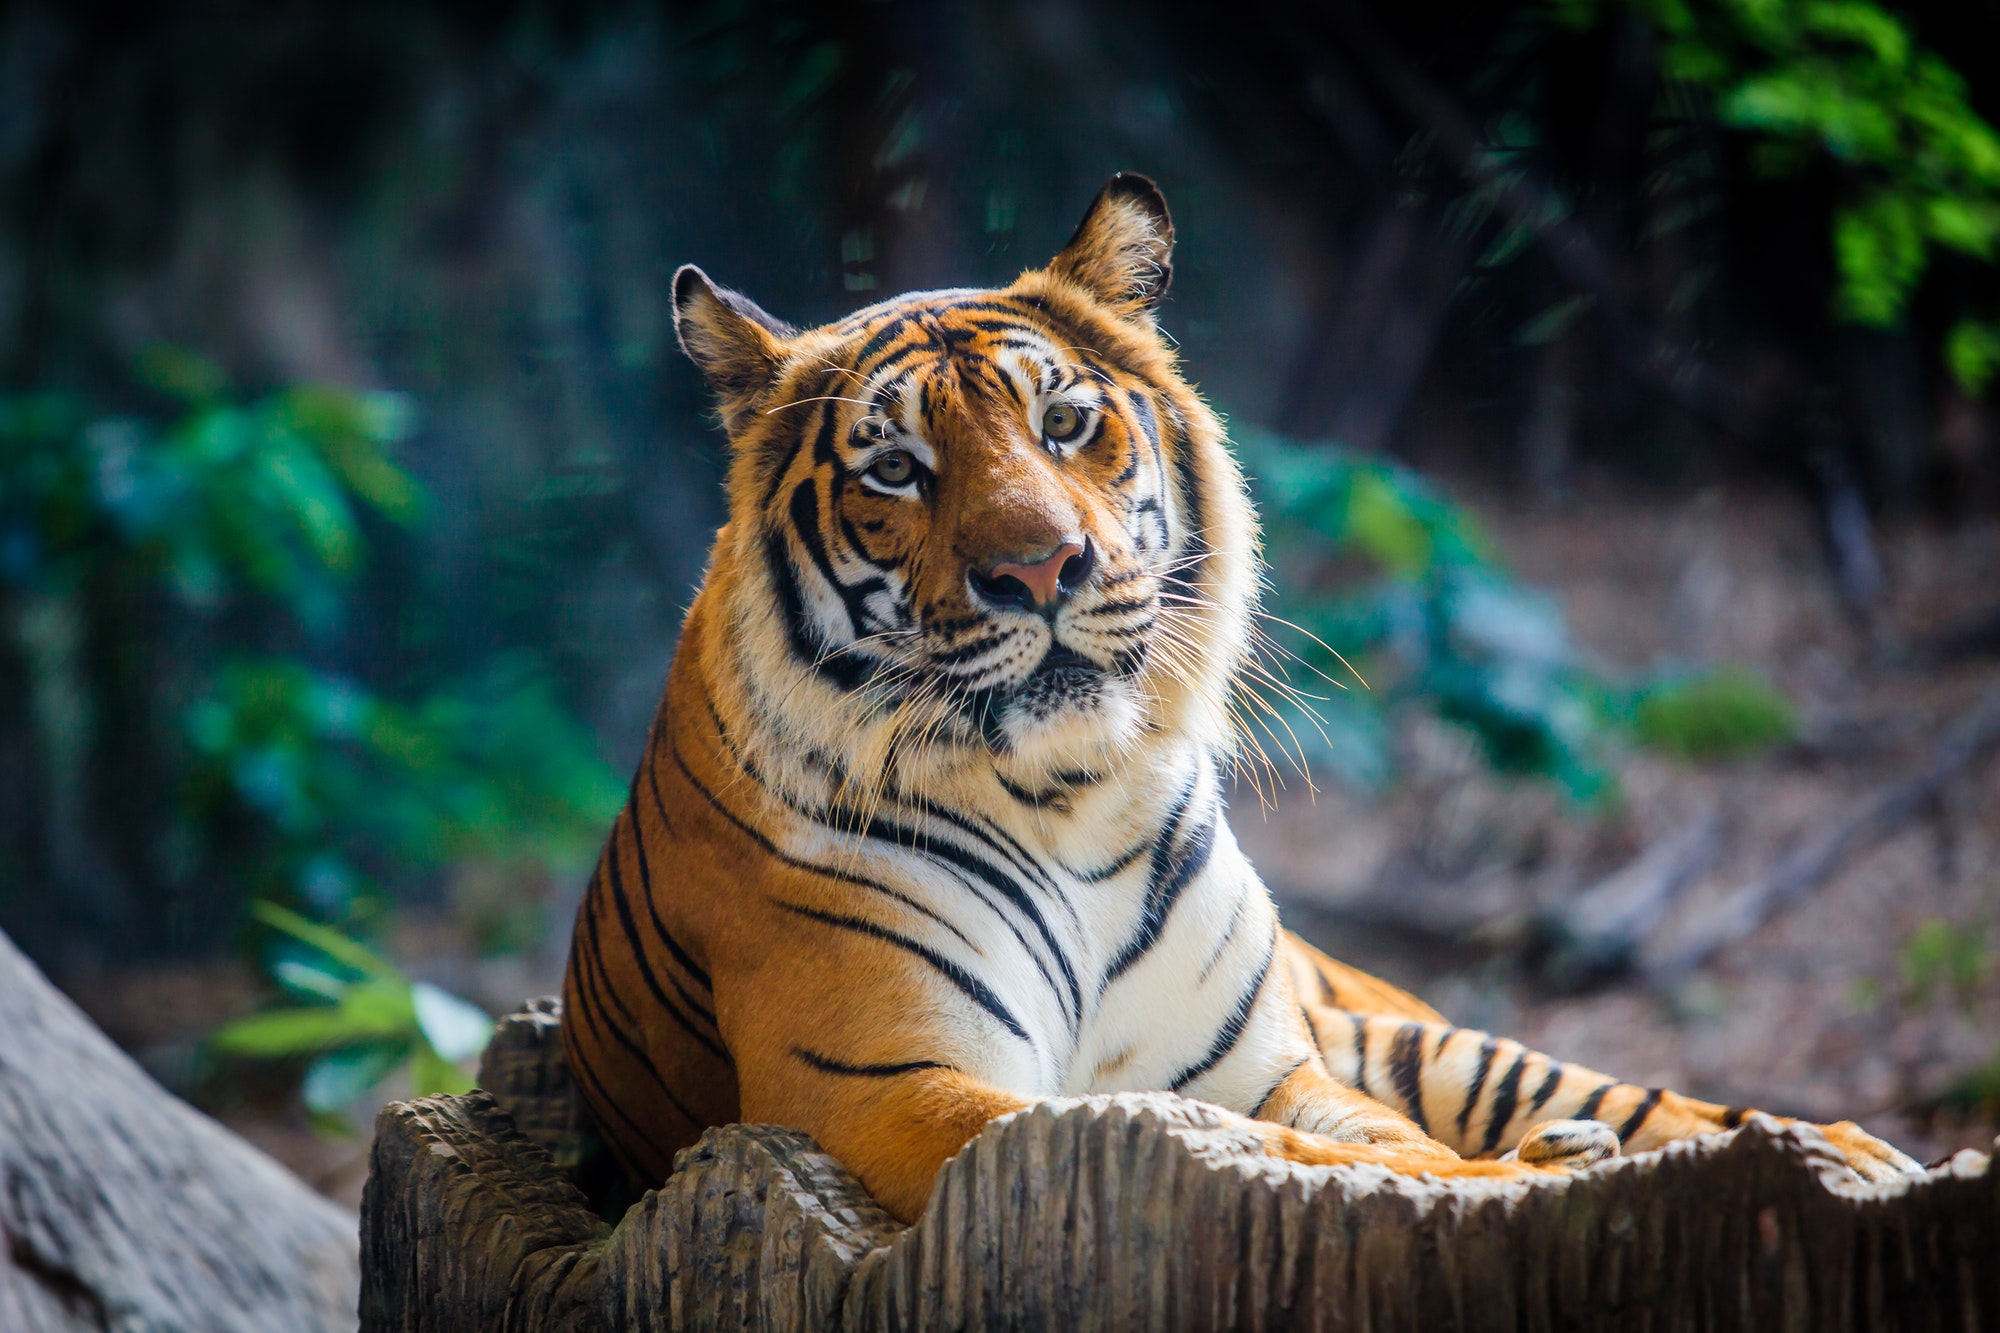 tiger-portrait-of-a-bengal-tiger-a-tiger-sitting-in-a-zoo-1-1-2.jpg